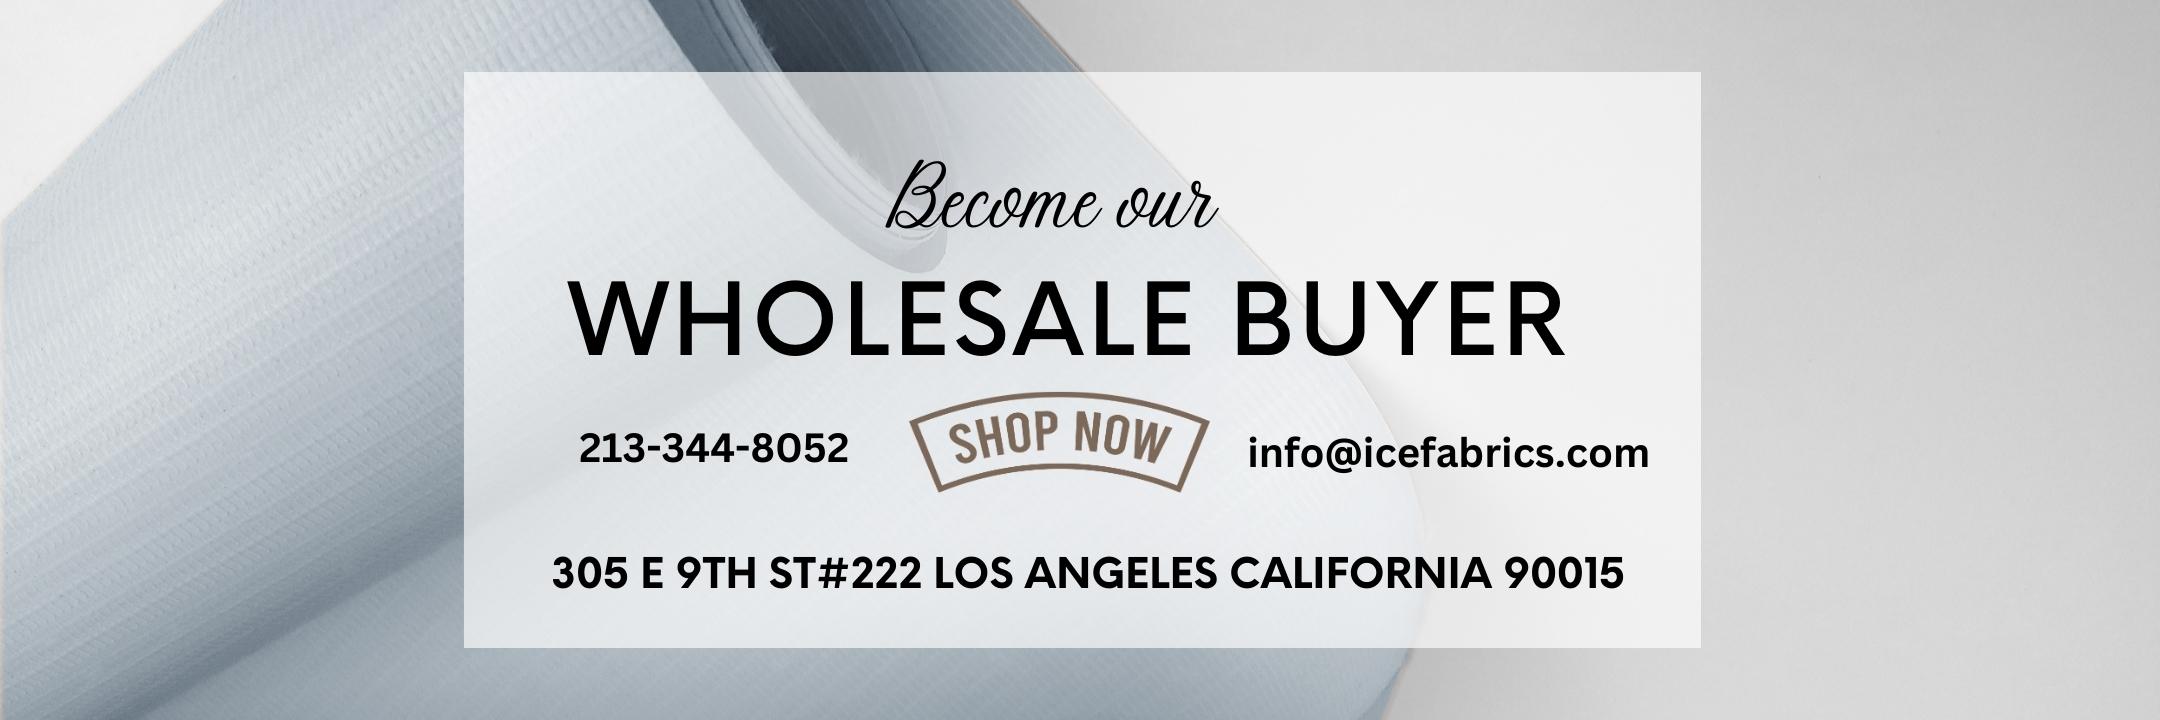 Become our Wholesale Buyer - Ice Fabrics